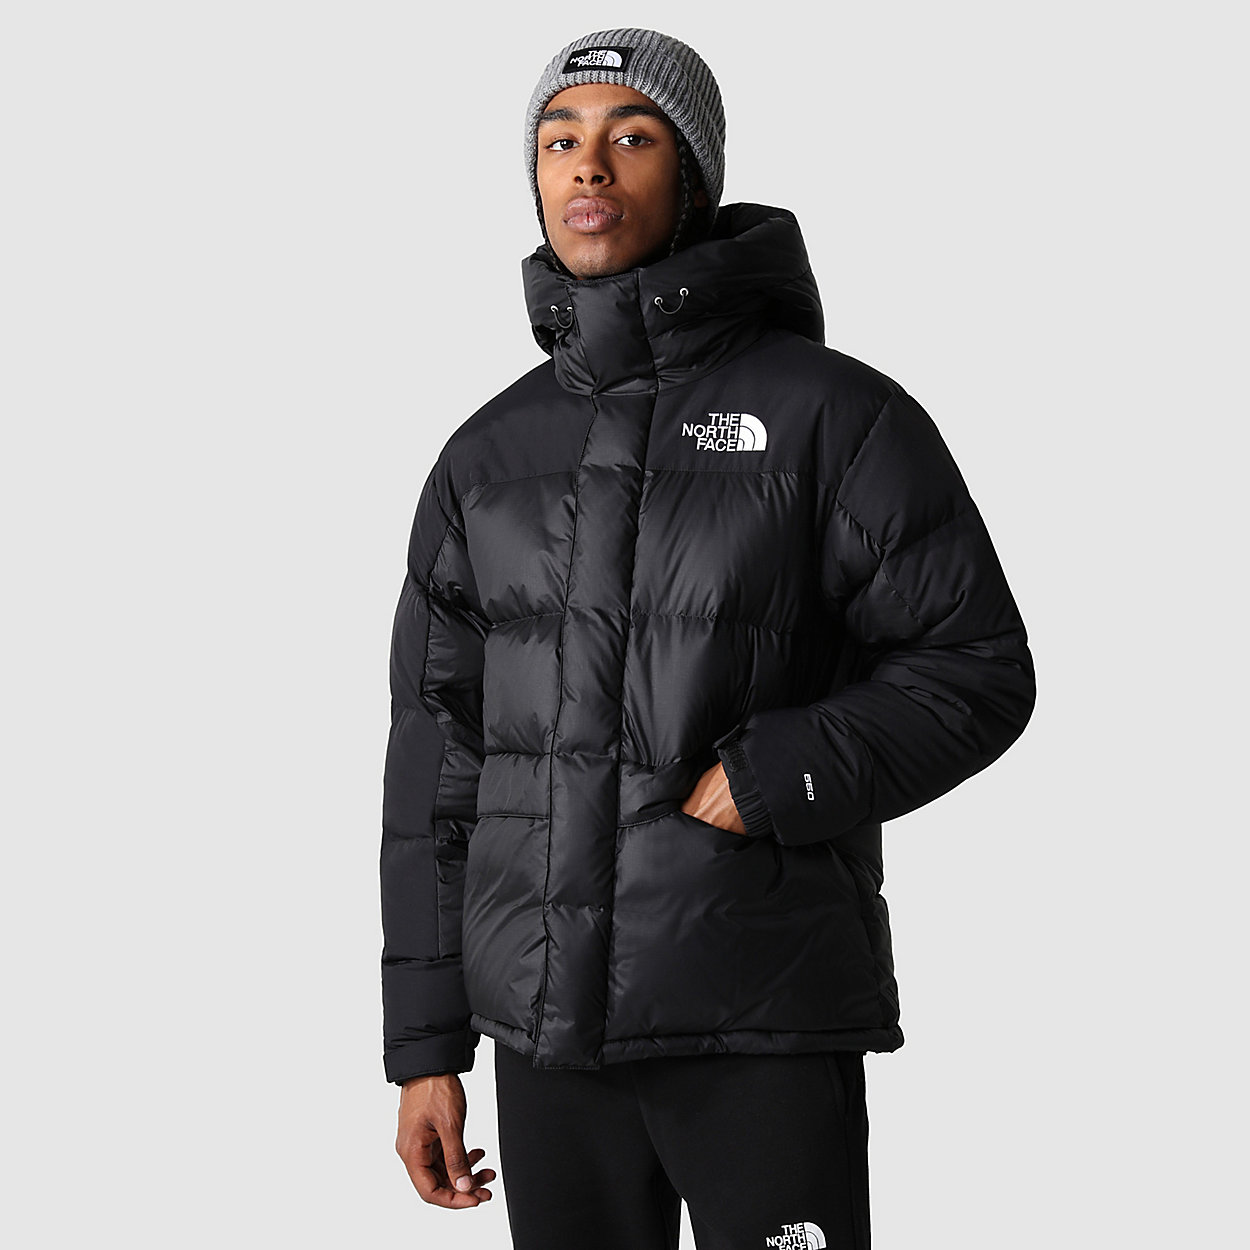 Unlock Wilderness' choice in the Napapijri Vs North Face comparison, the Himalayan Down Parka by The North Face